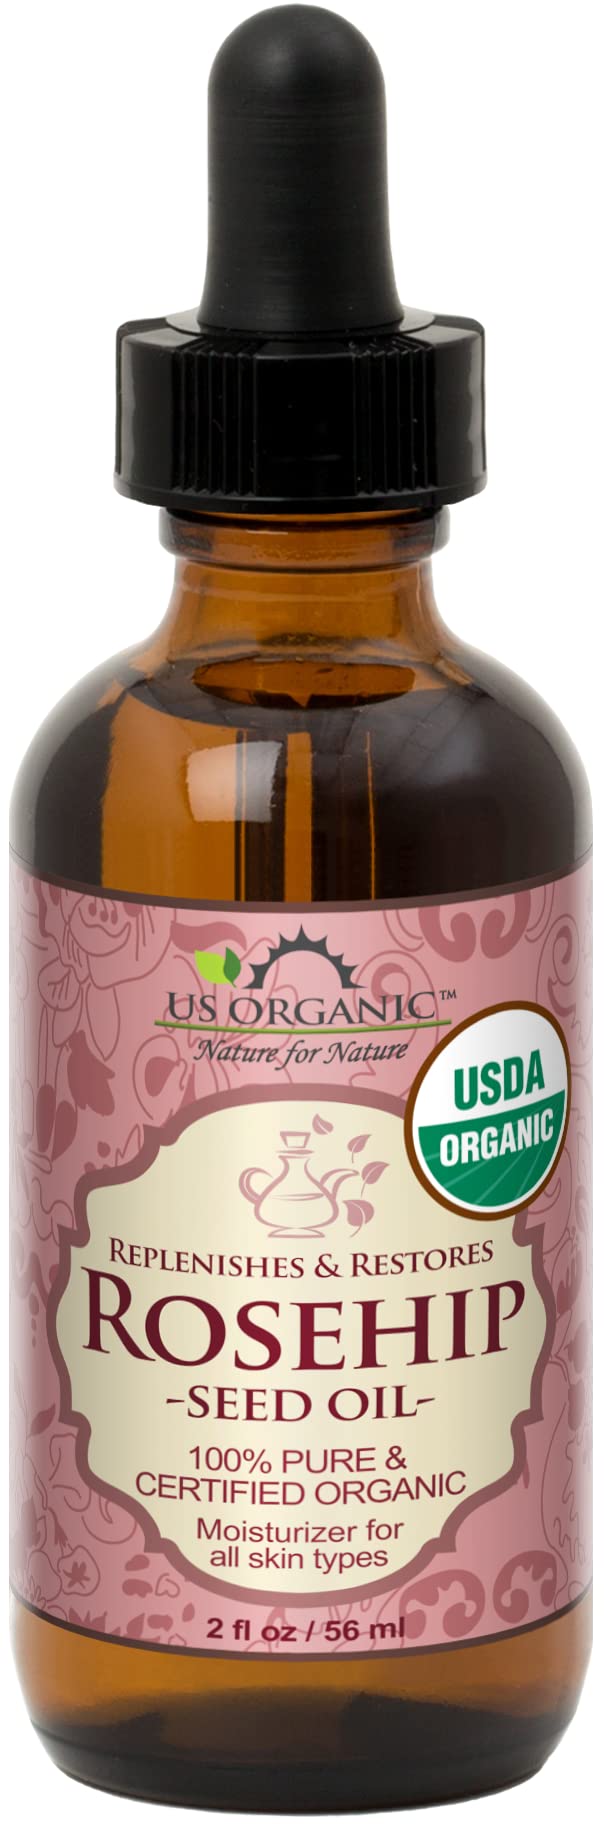 US Organic Rosehip Seed Oil, USDA Certified Organic, Cold Pressed, Virgin Organic, Amber Glass Bottle and Glass Eye Dropper for Easy Application - 2 oz (56 ml)